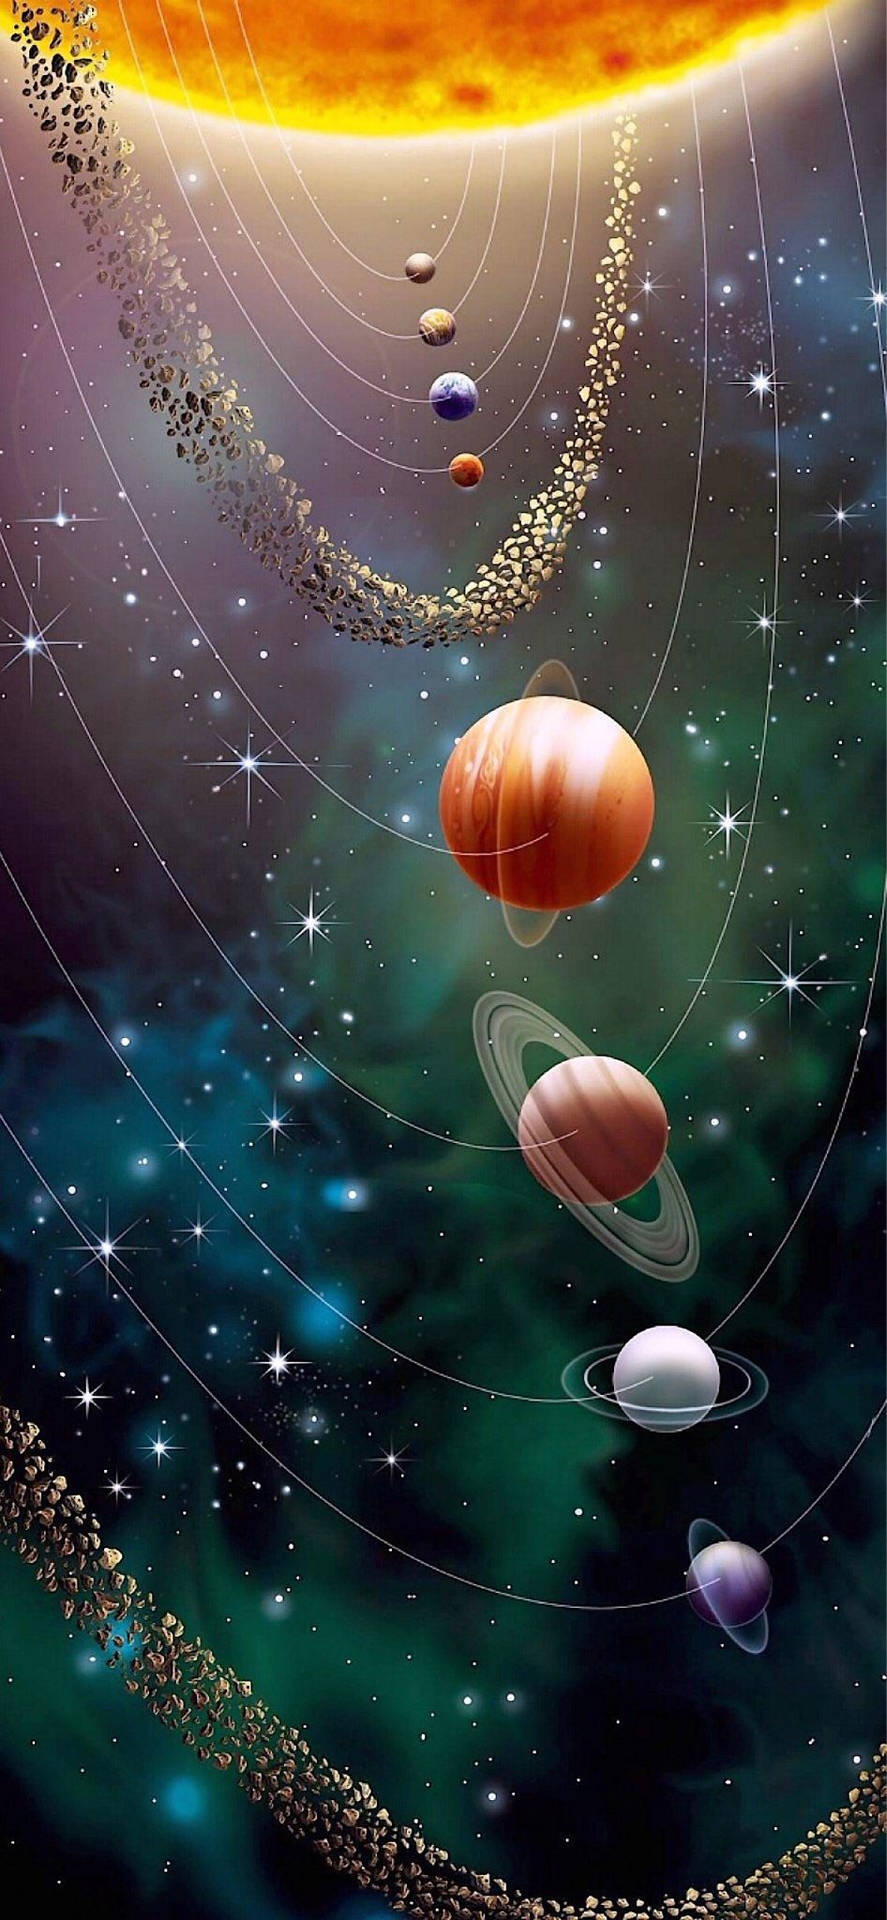 A Solar System With Many Planets In The Background Wallpaper